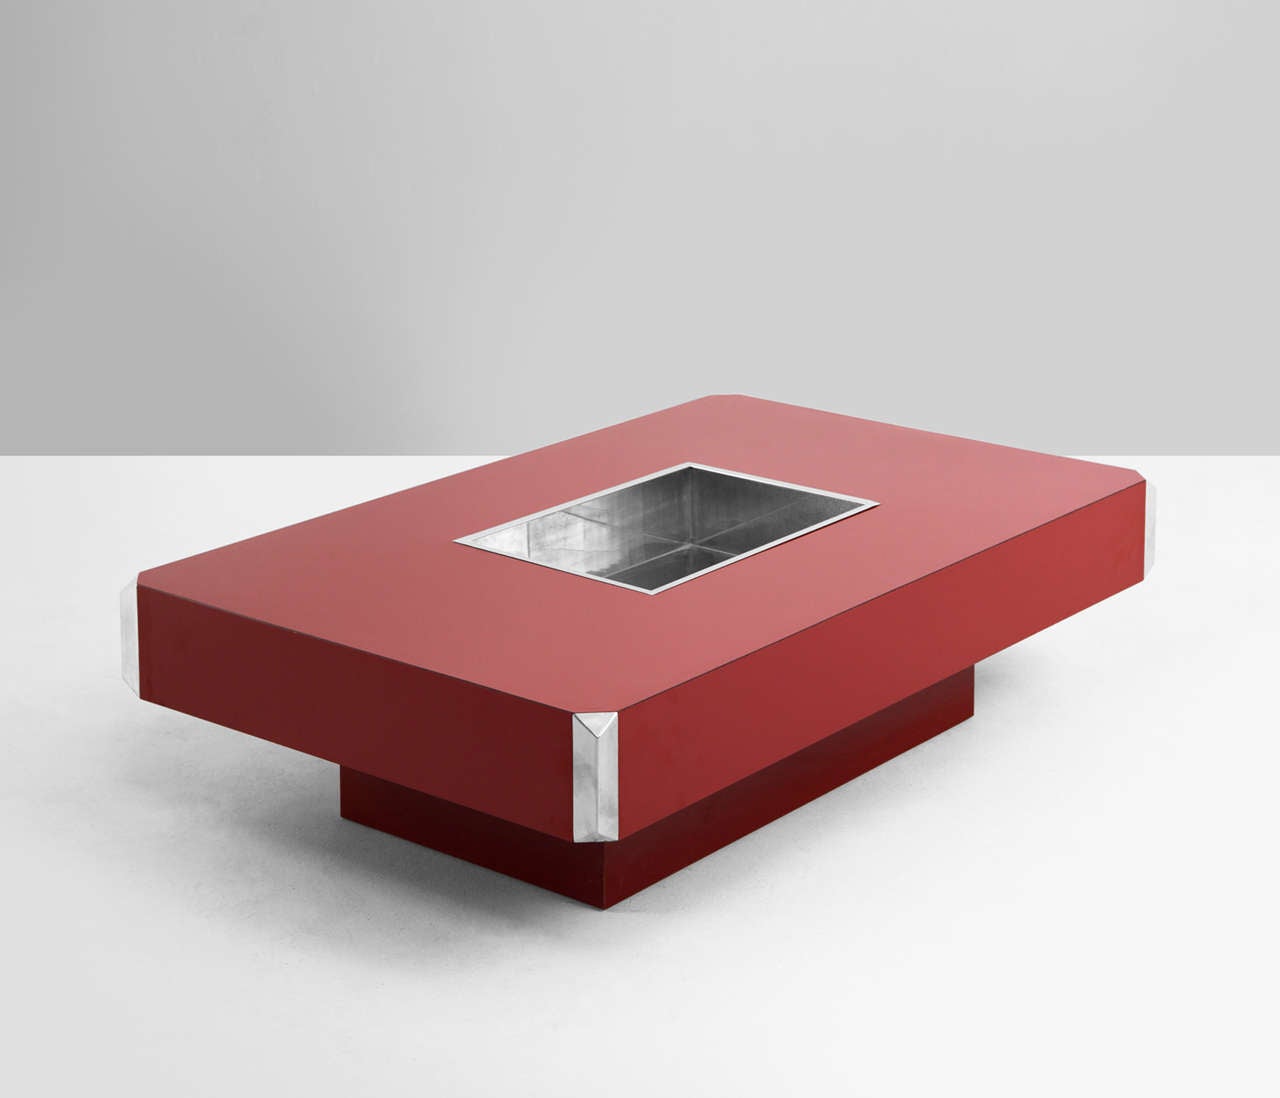 Cocktail table in red laminate and chrome, by Mario Sabot, Italy, 1970s.

A beautiful coffee table in red laminate and chrome, produced by Mario Sabot in the early 1970s. With chromed steel details and a nicely integrated steel center bucket for